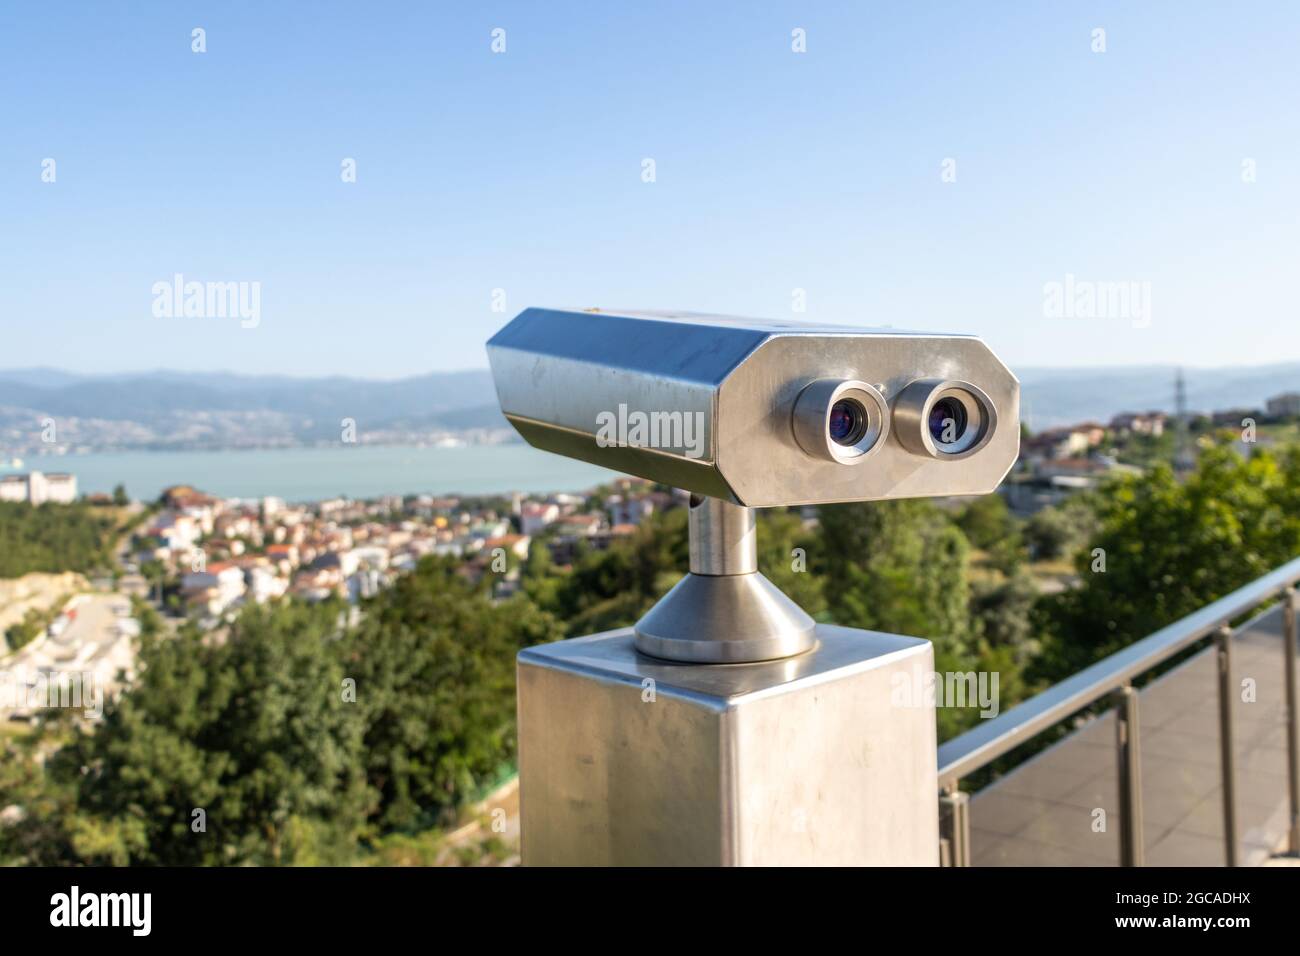 Touristic coin operated telescope binoculars look at the city landscape view Stock Photo